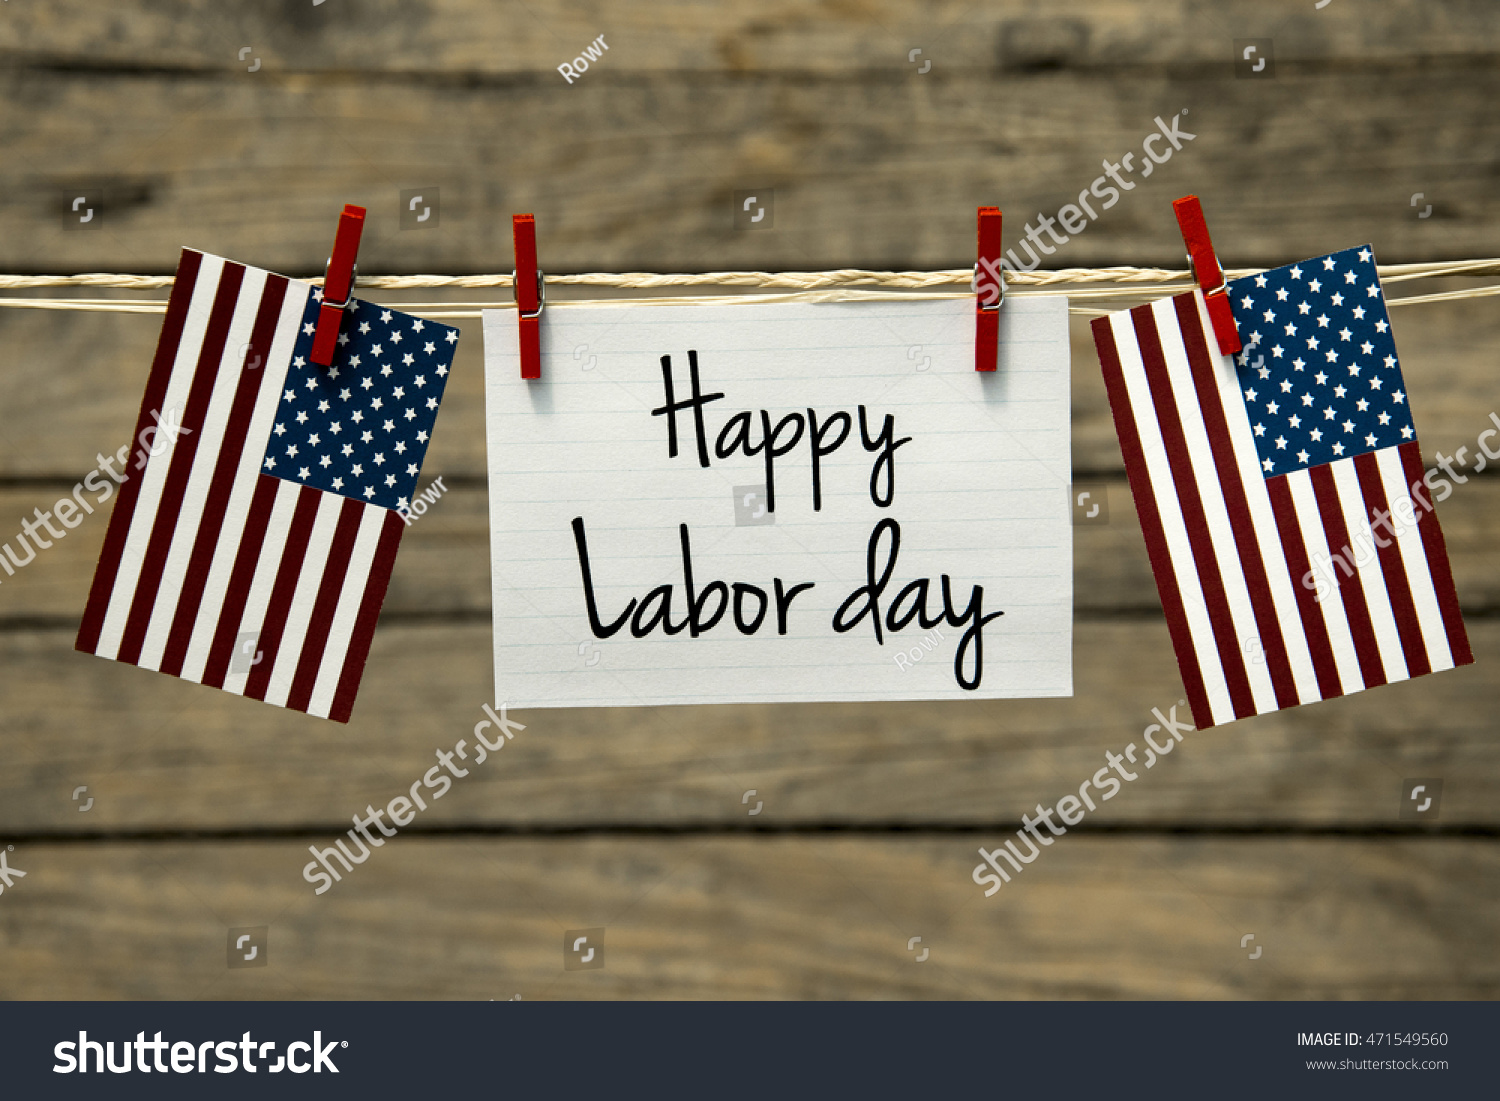 Happy Labor day greeting card or background. #471549560